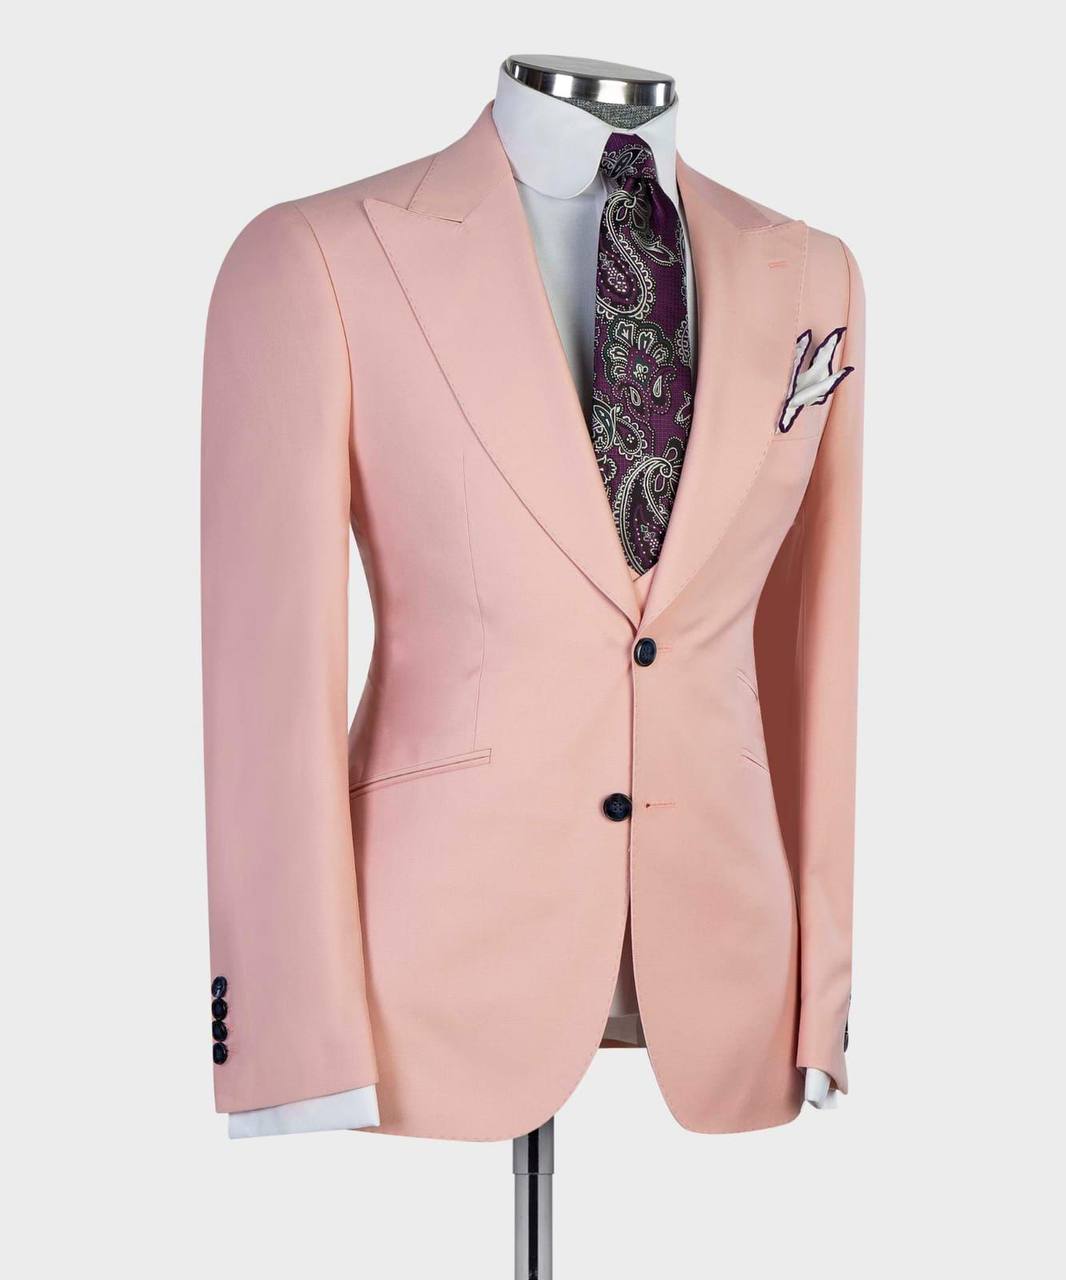 Men's 3 Piece, Single Breasted, Pink Suit, Peak Lapel, Best for Wedding, Business, Prom, SV3